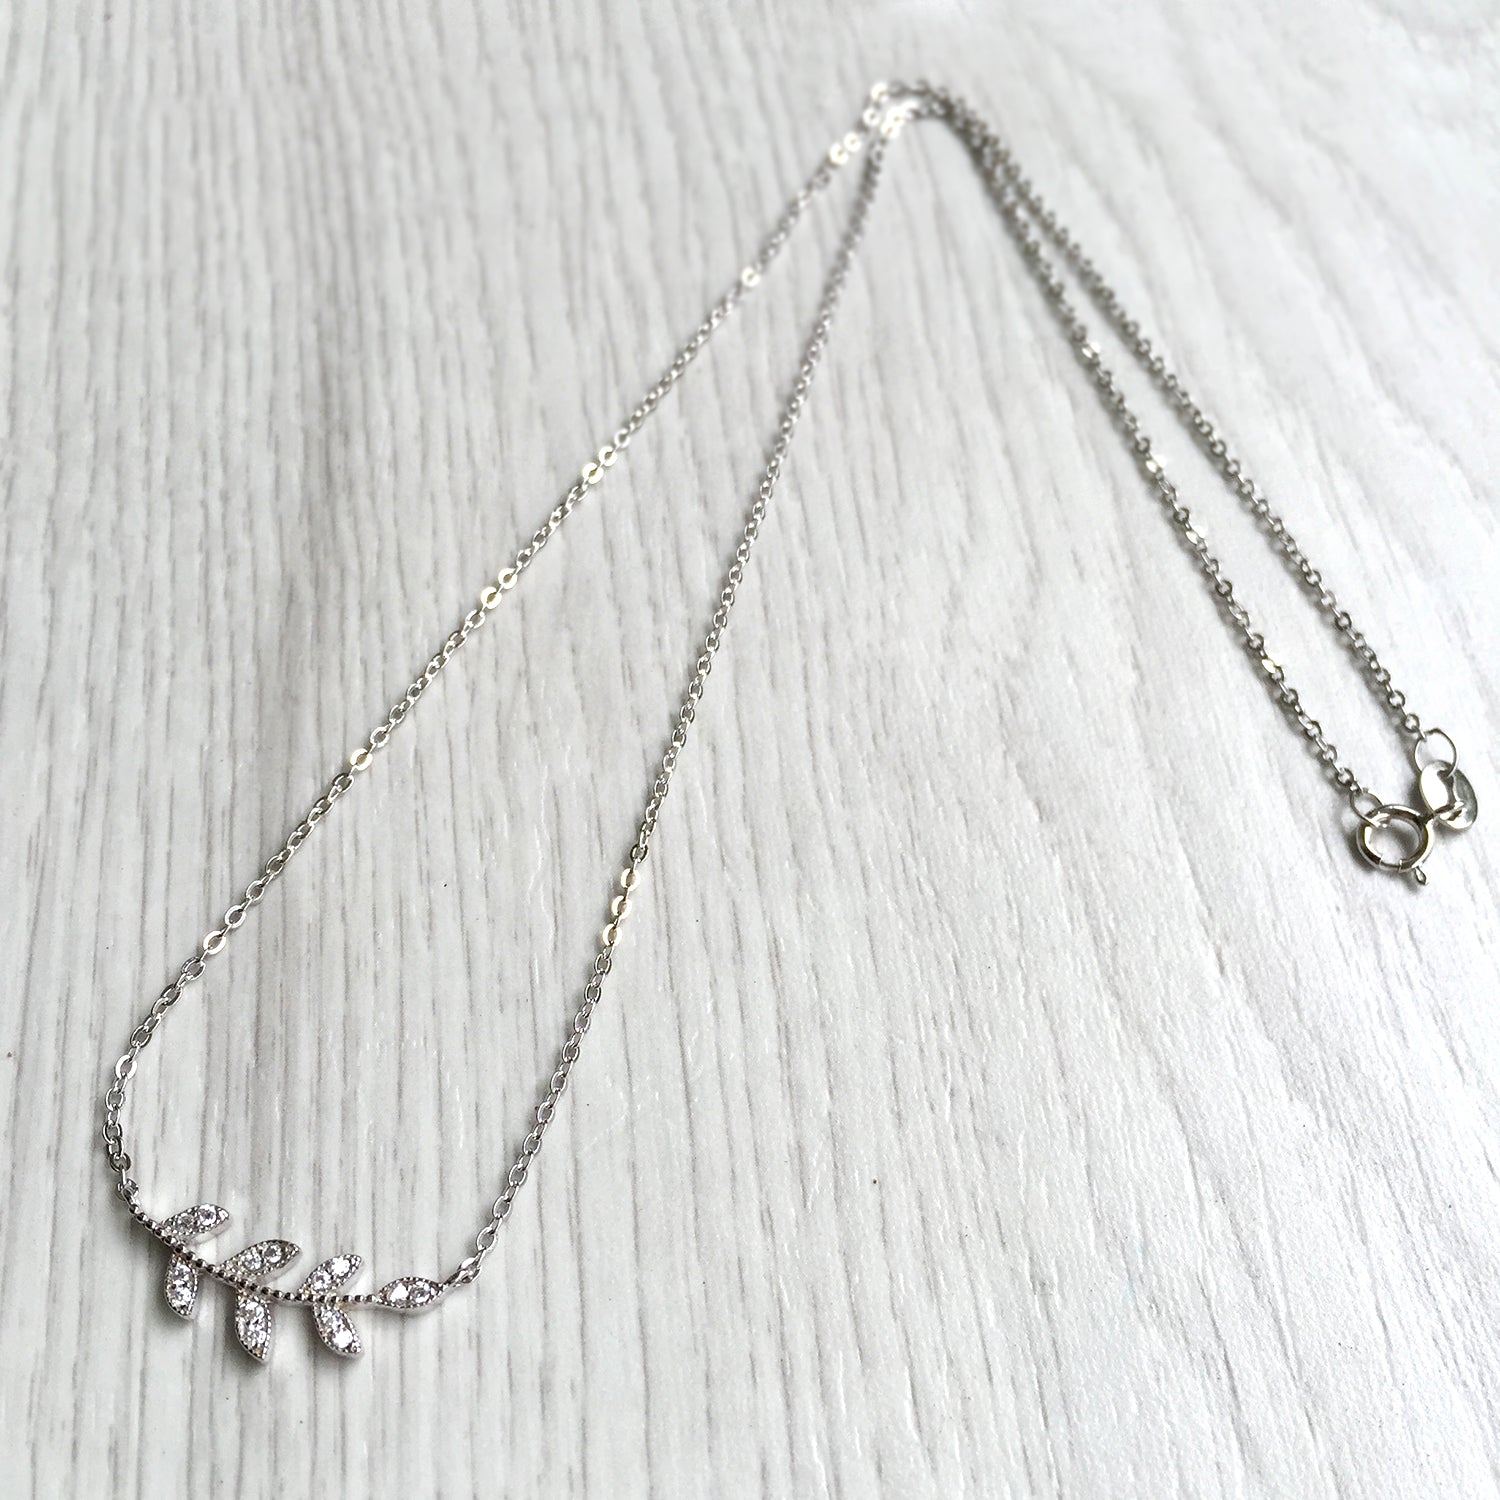 Sterling Silver Leaf Necklace, Delicate Silver Necklace, Valentines Day Gift Idea